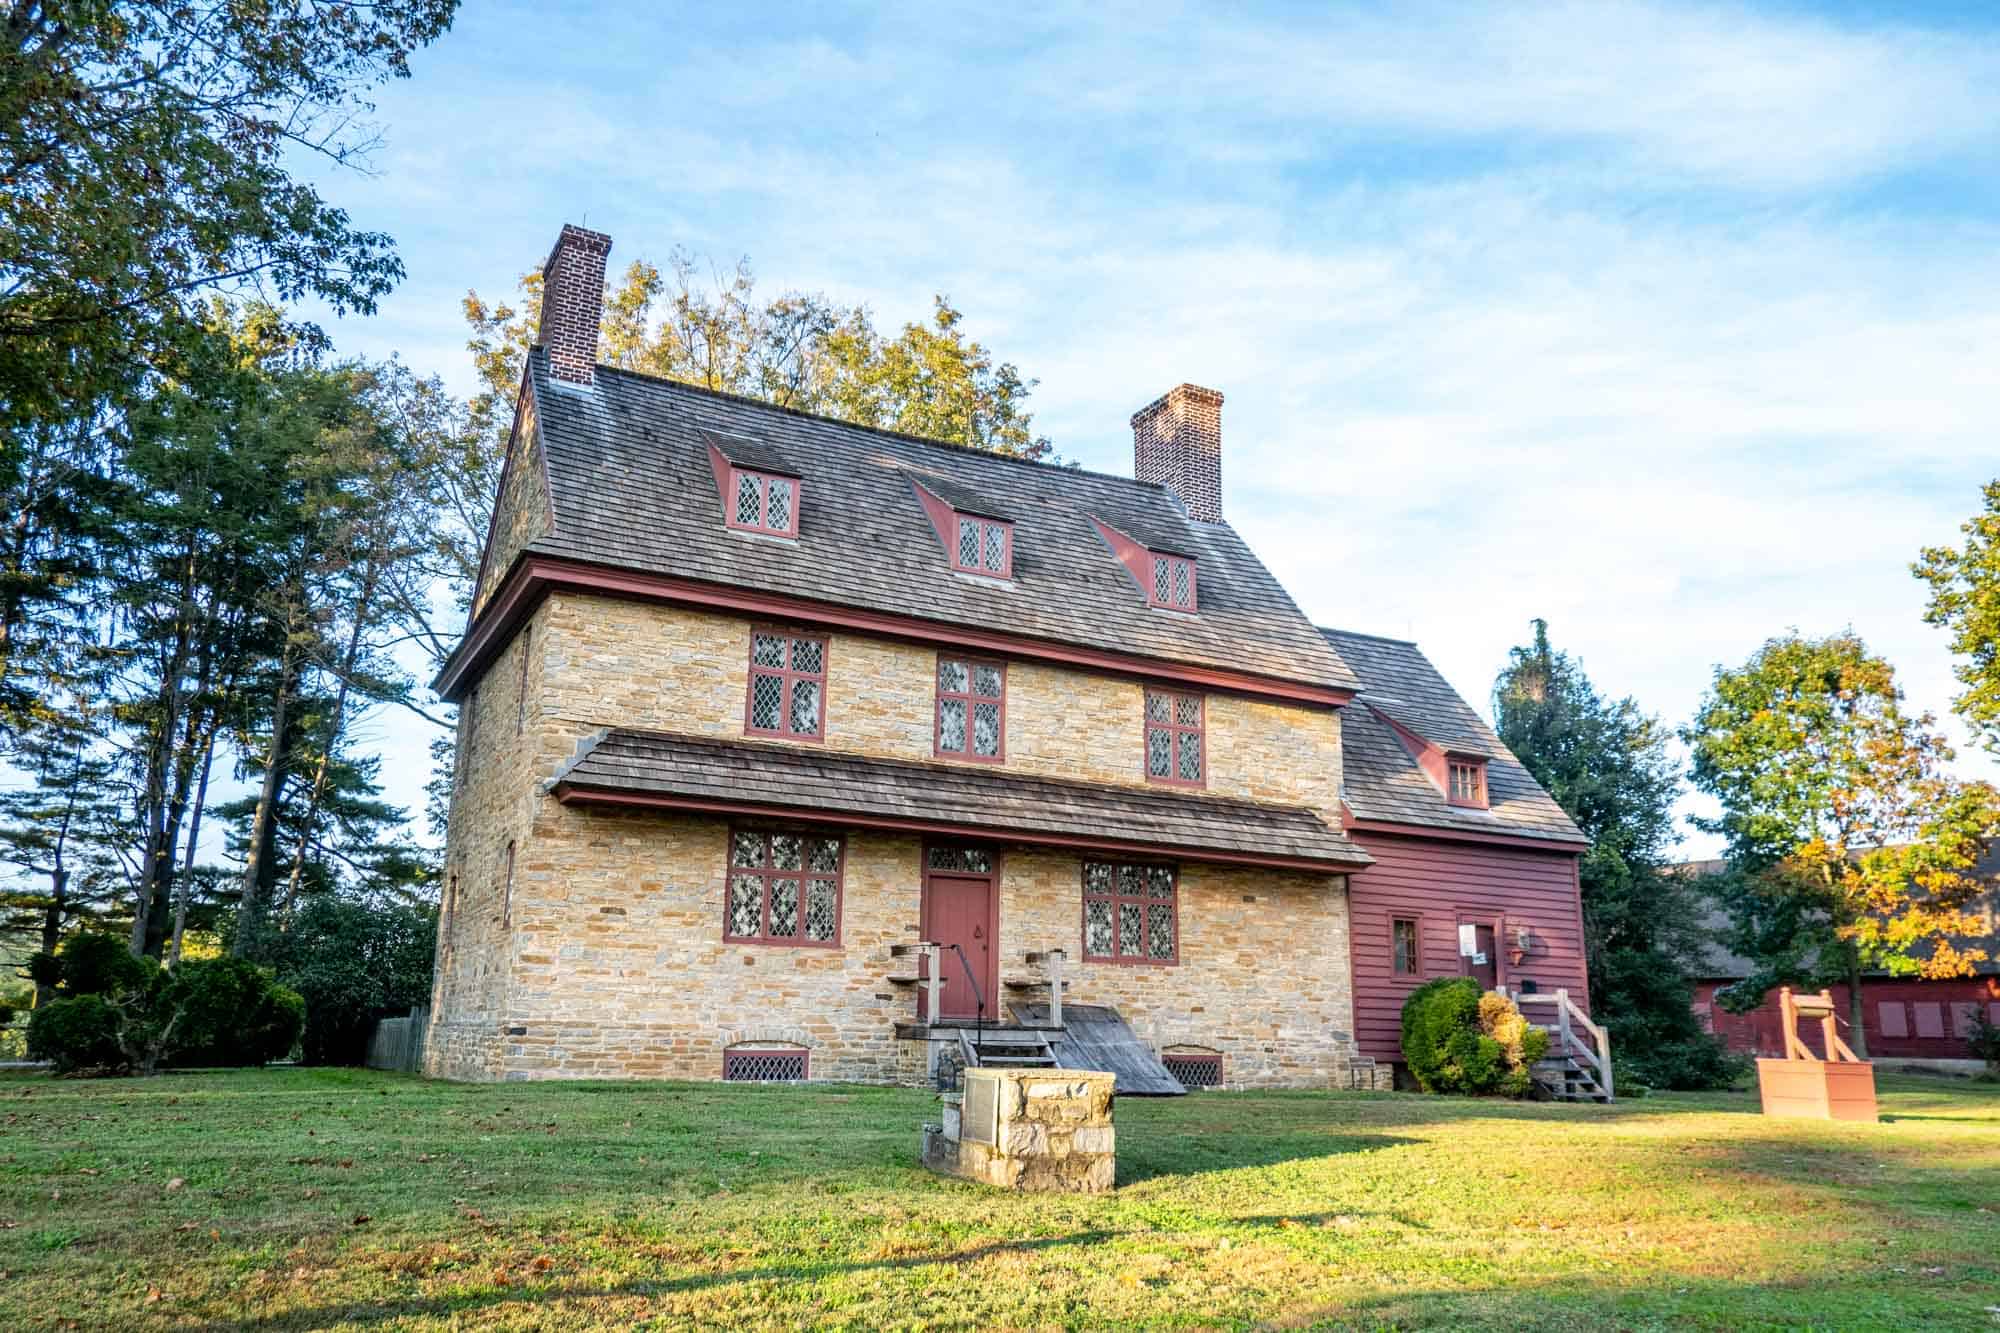 Two-story stone house with two chimneys and two wells in the front yard